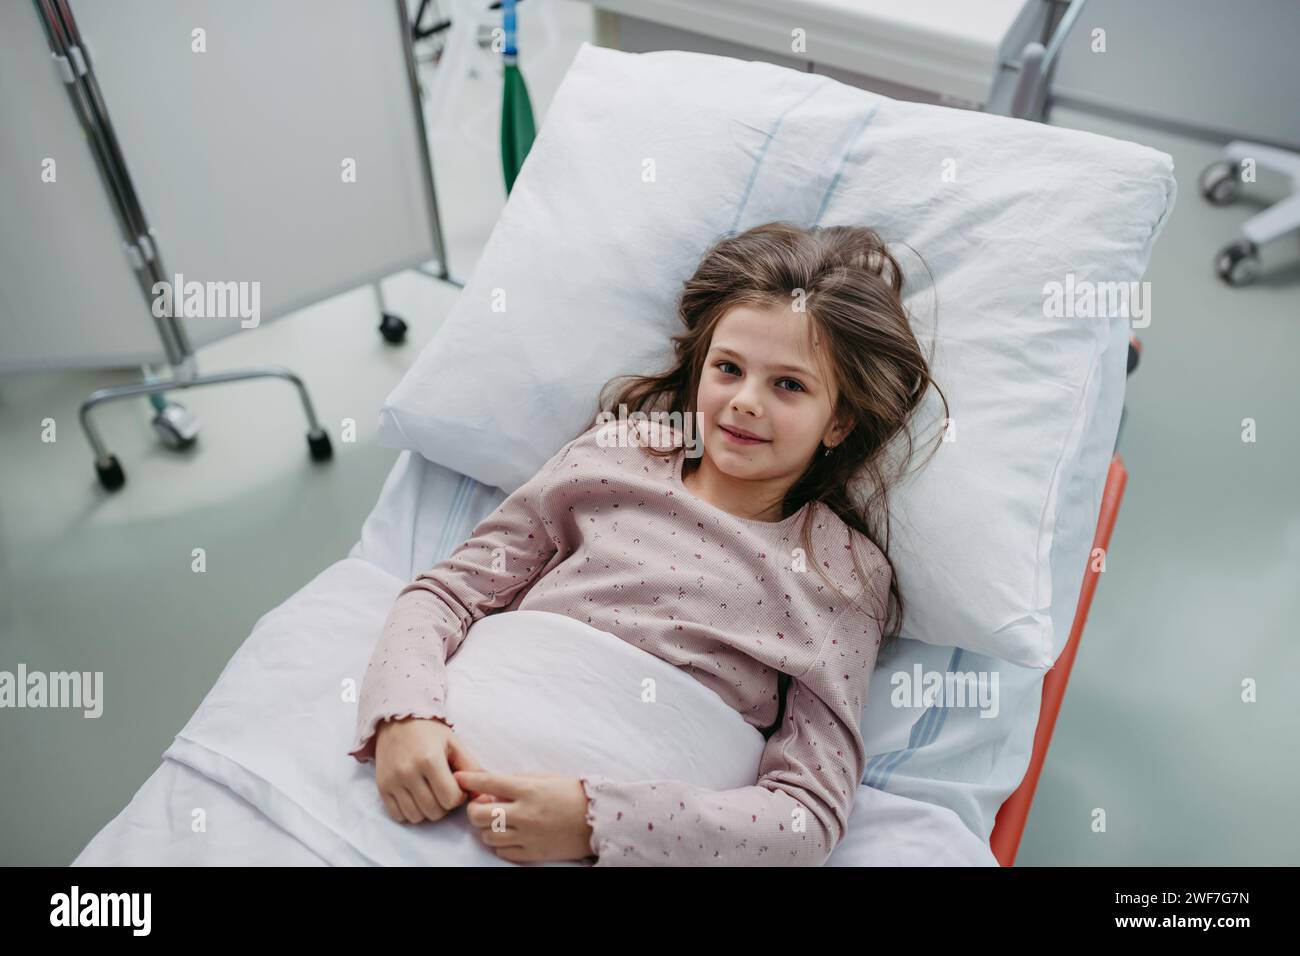 Little girl patient lying in hospital bed. Children in intensive care unit in hospital smiling. Stock Photo